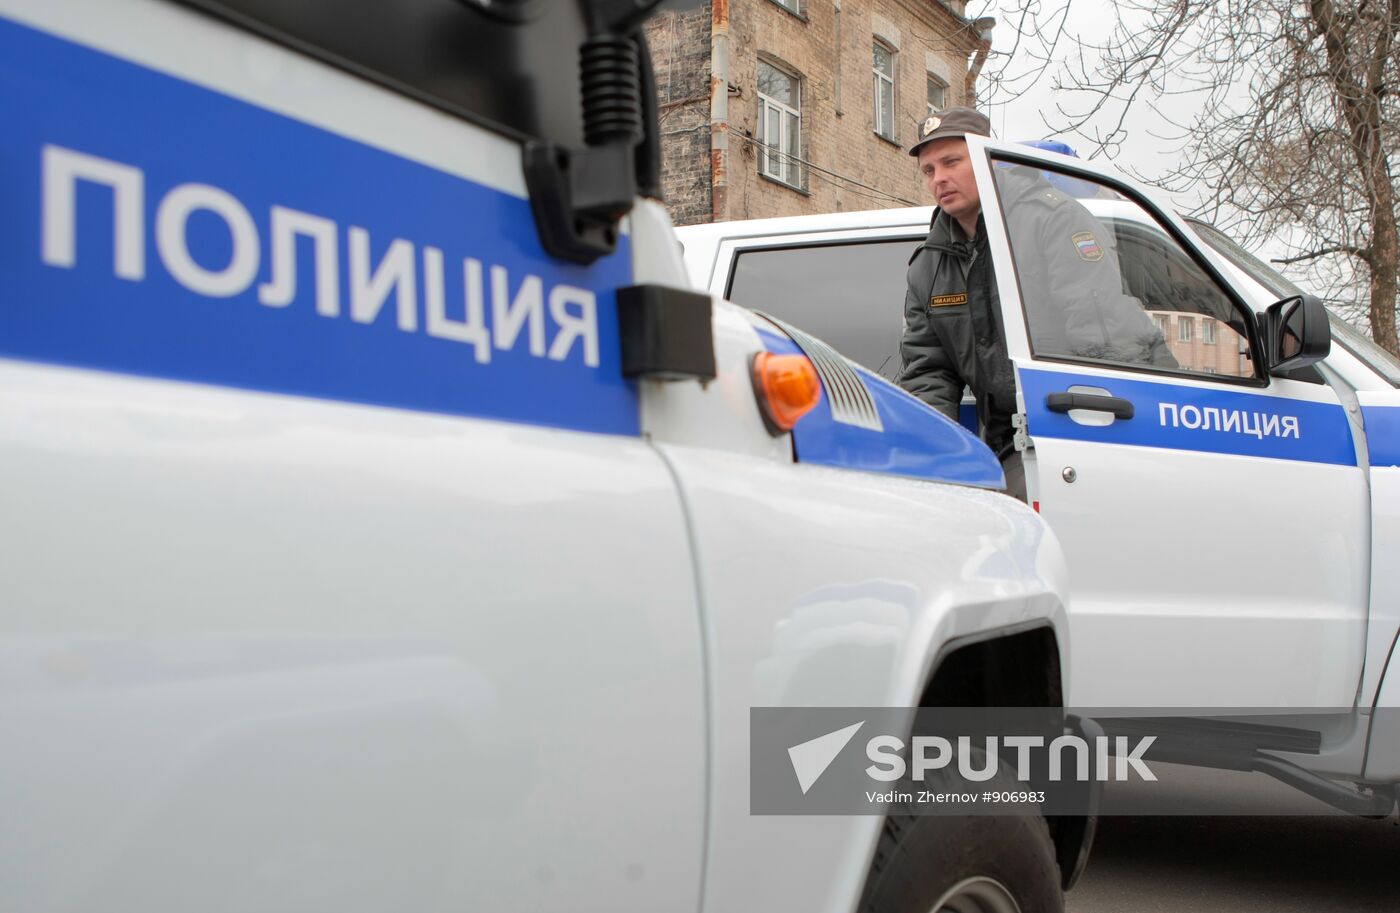 St. Petersburg police receive new service vehicles